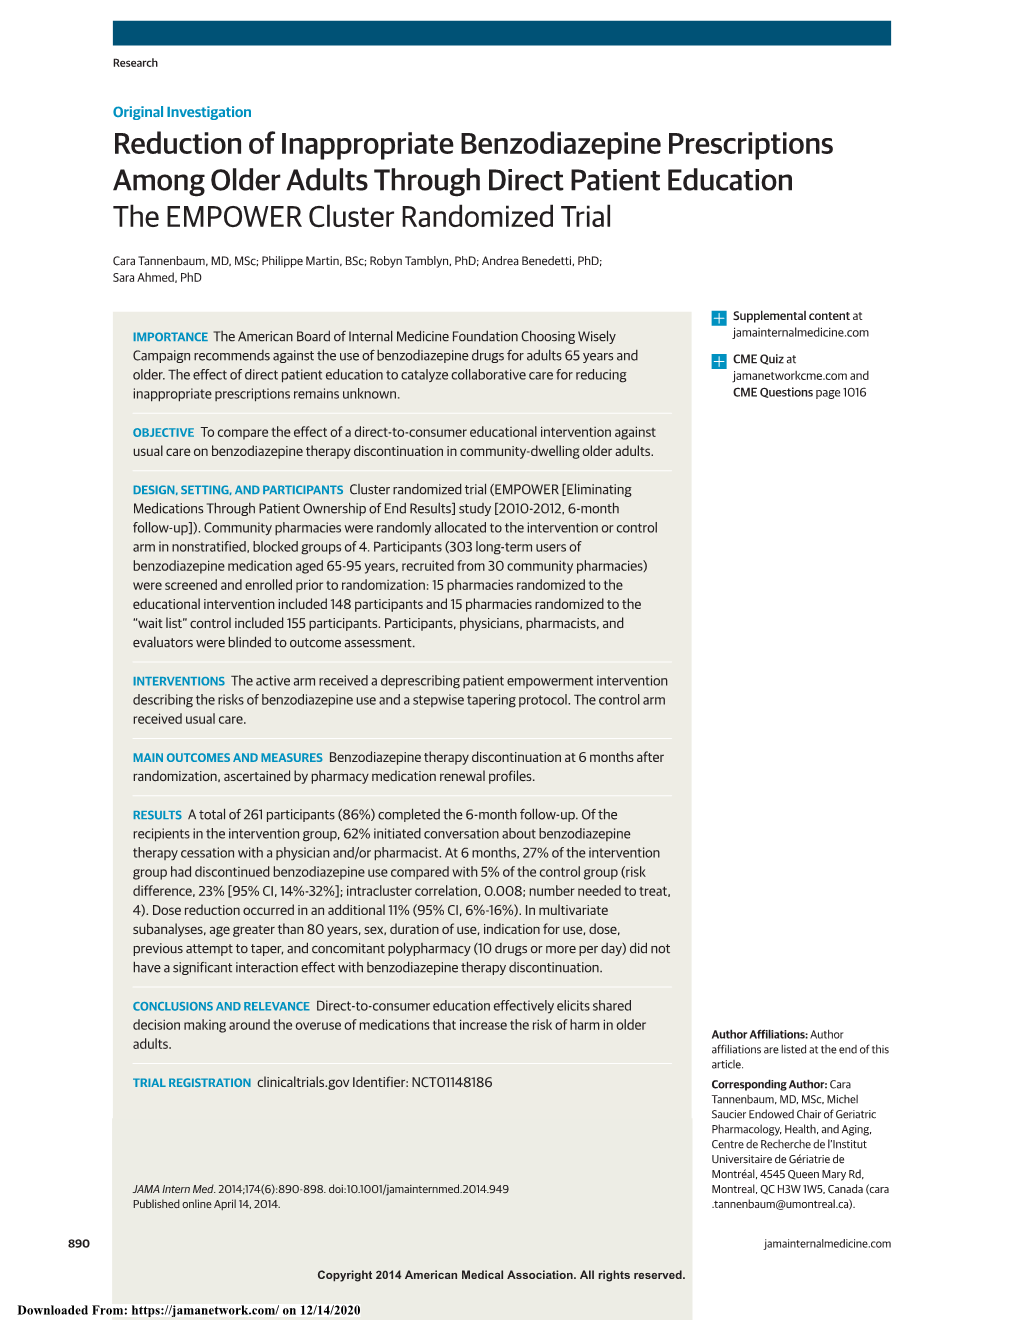 Reduction of Inappropriate Benzodiazepine Prescriptions Among Older Adults Through Direct Patient Education the EMPOWER Cluster Randomized Trial